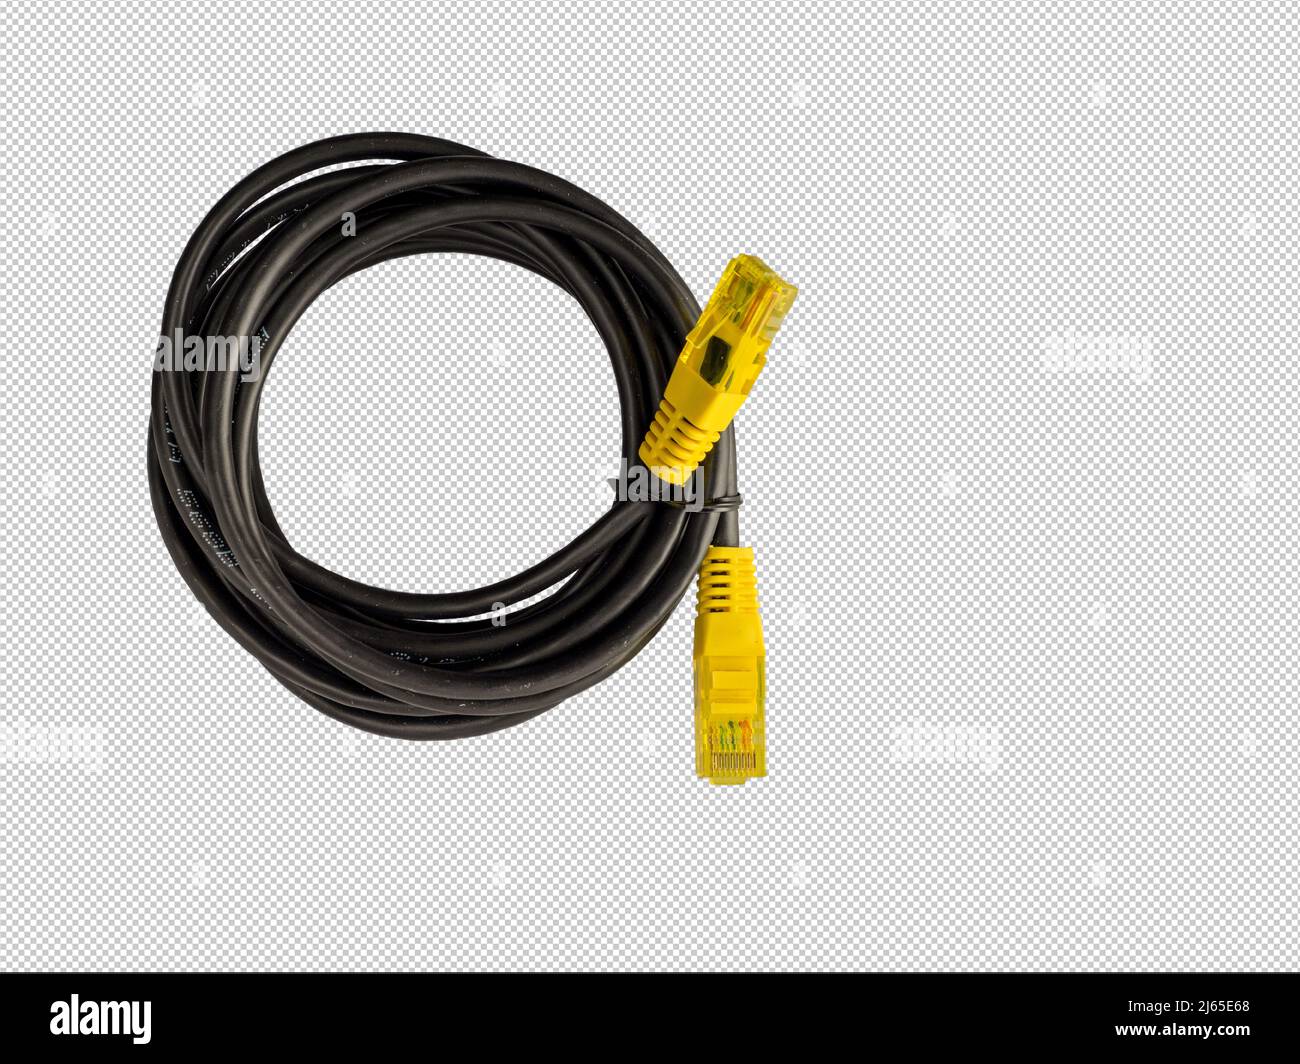 Black coiled up computer network cable with bright yellow connection socket plugs on a clear background Stock Photo